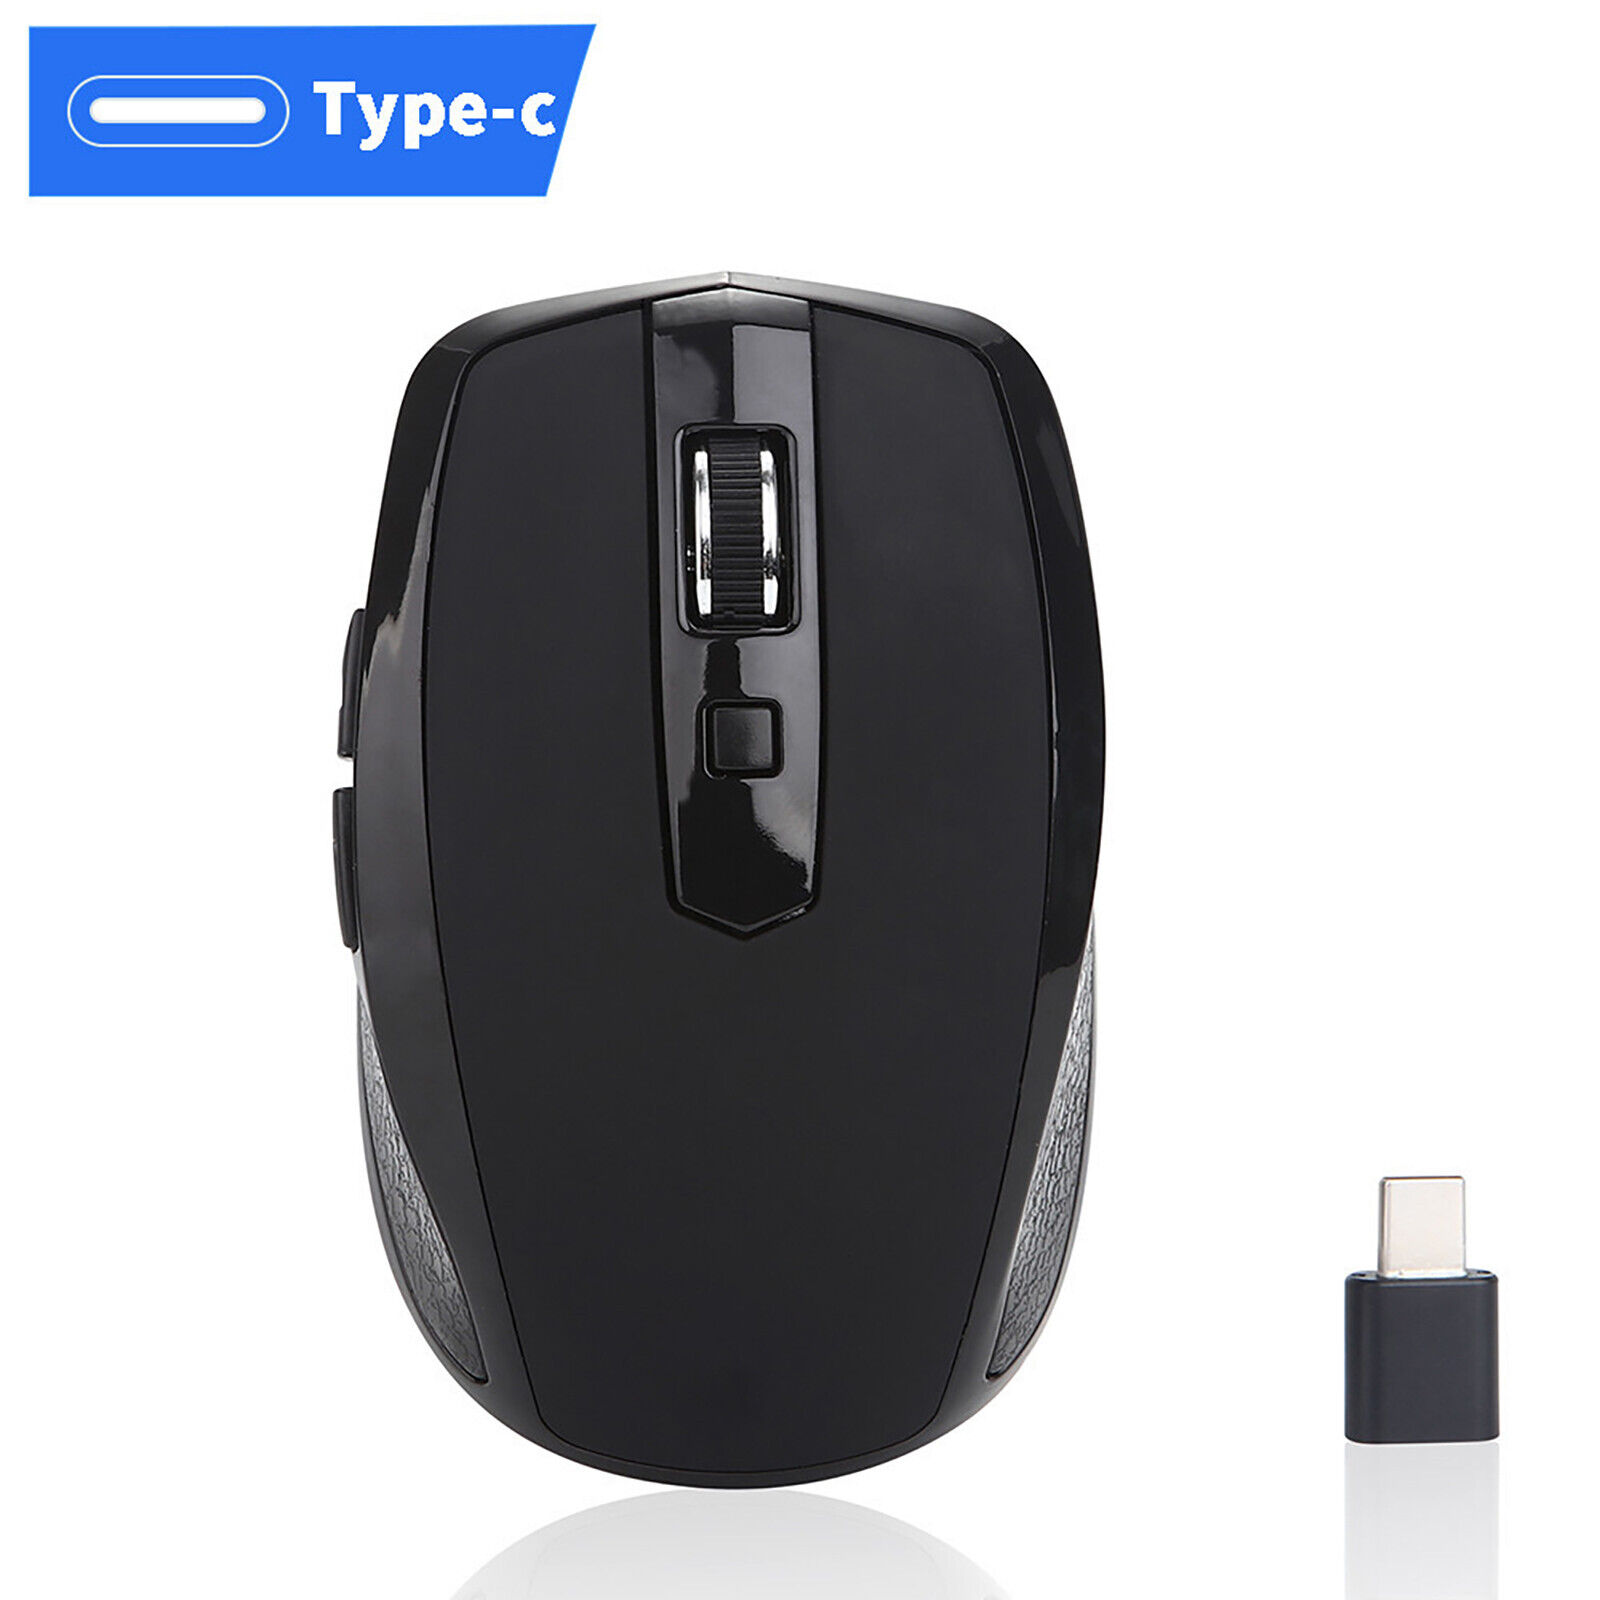 2.4GHZ Type C Wireless Mouse USB C Ergonomic Mice For Macbook,Pro C Devices